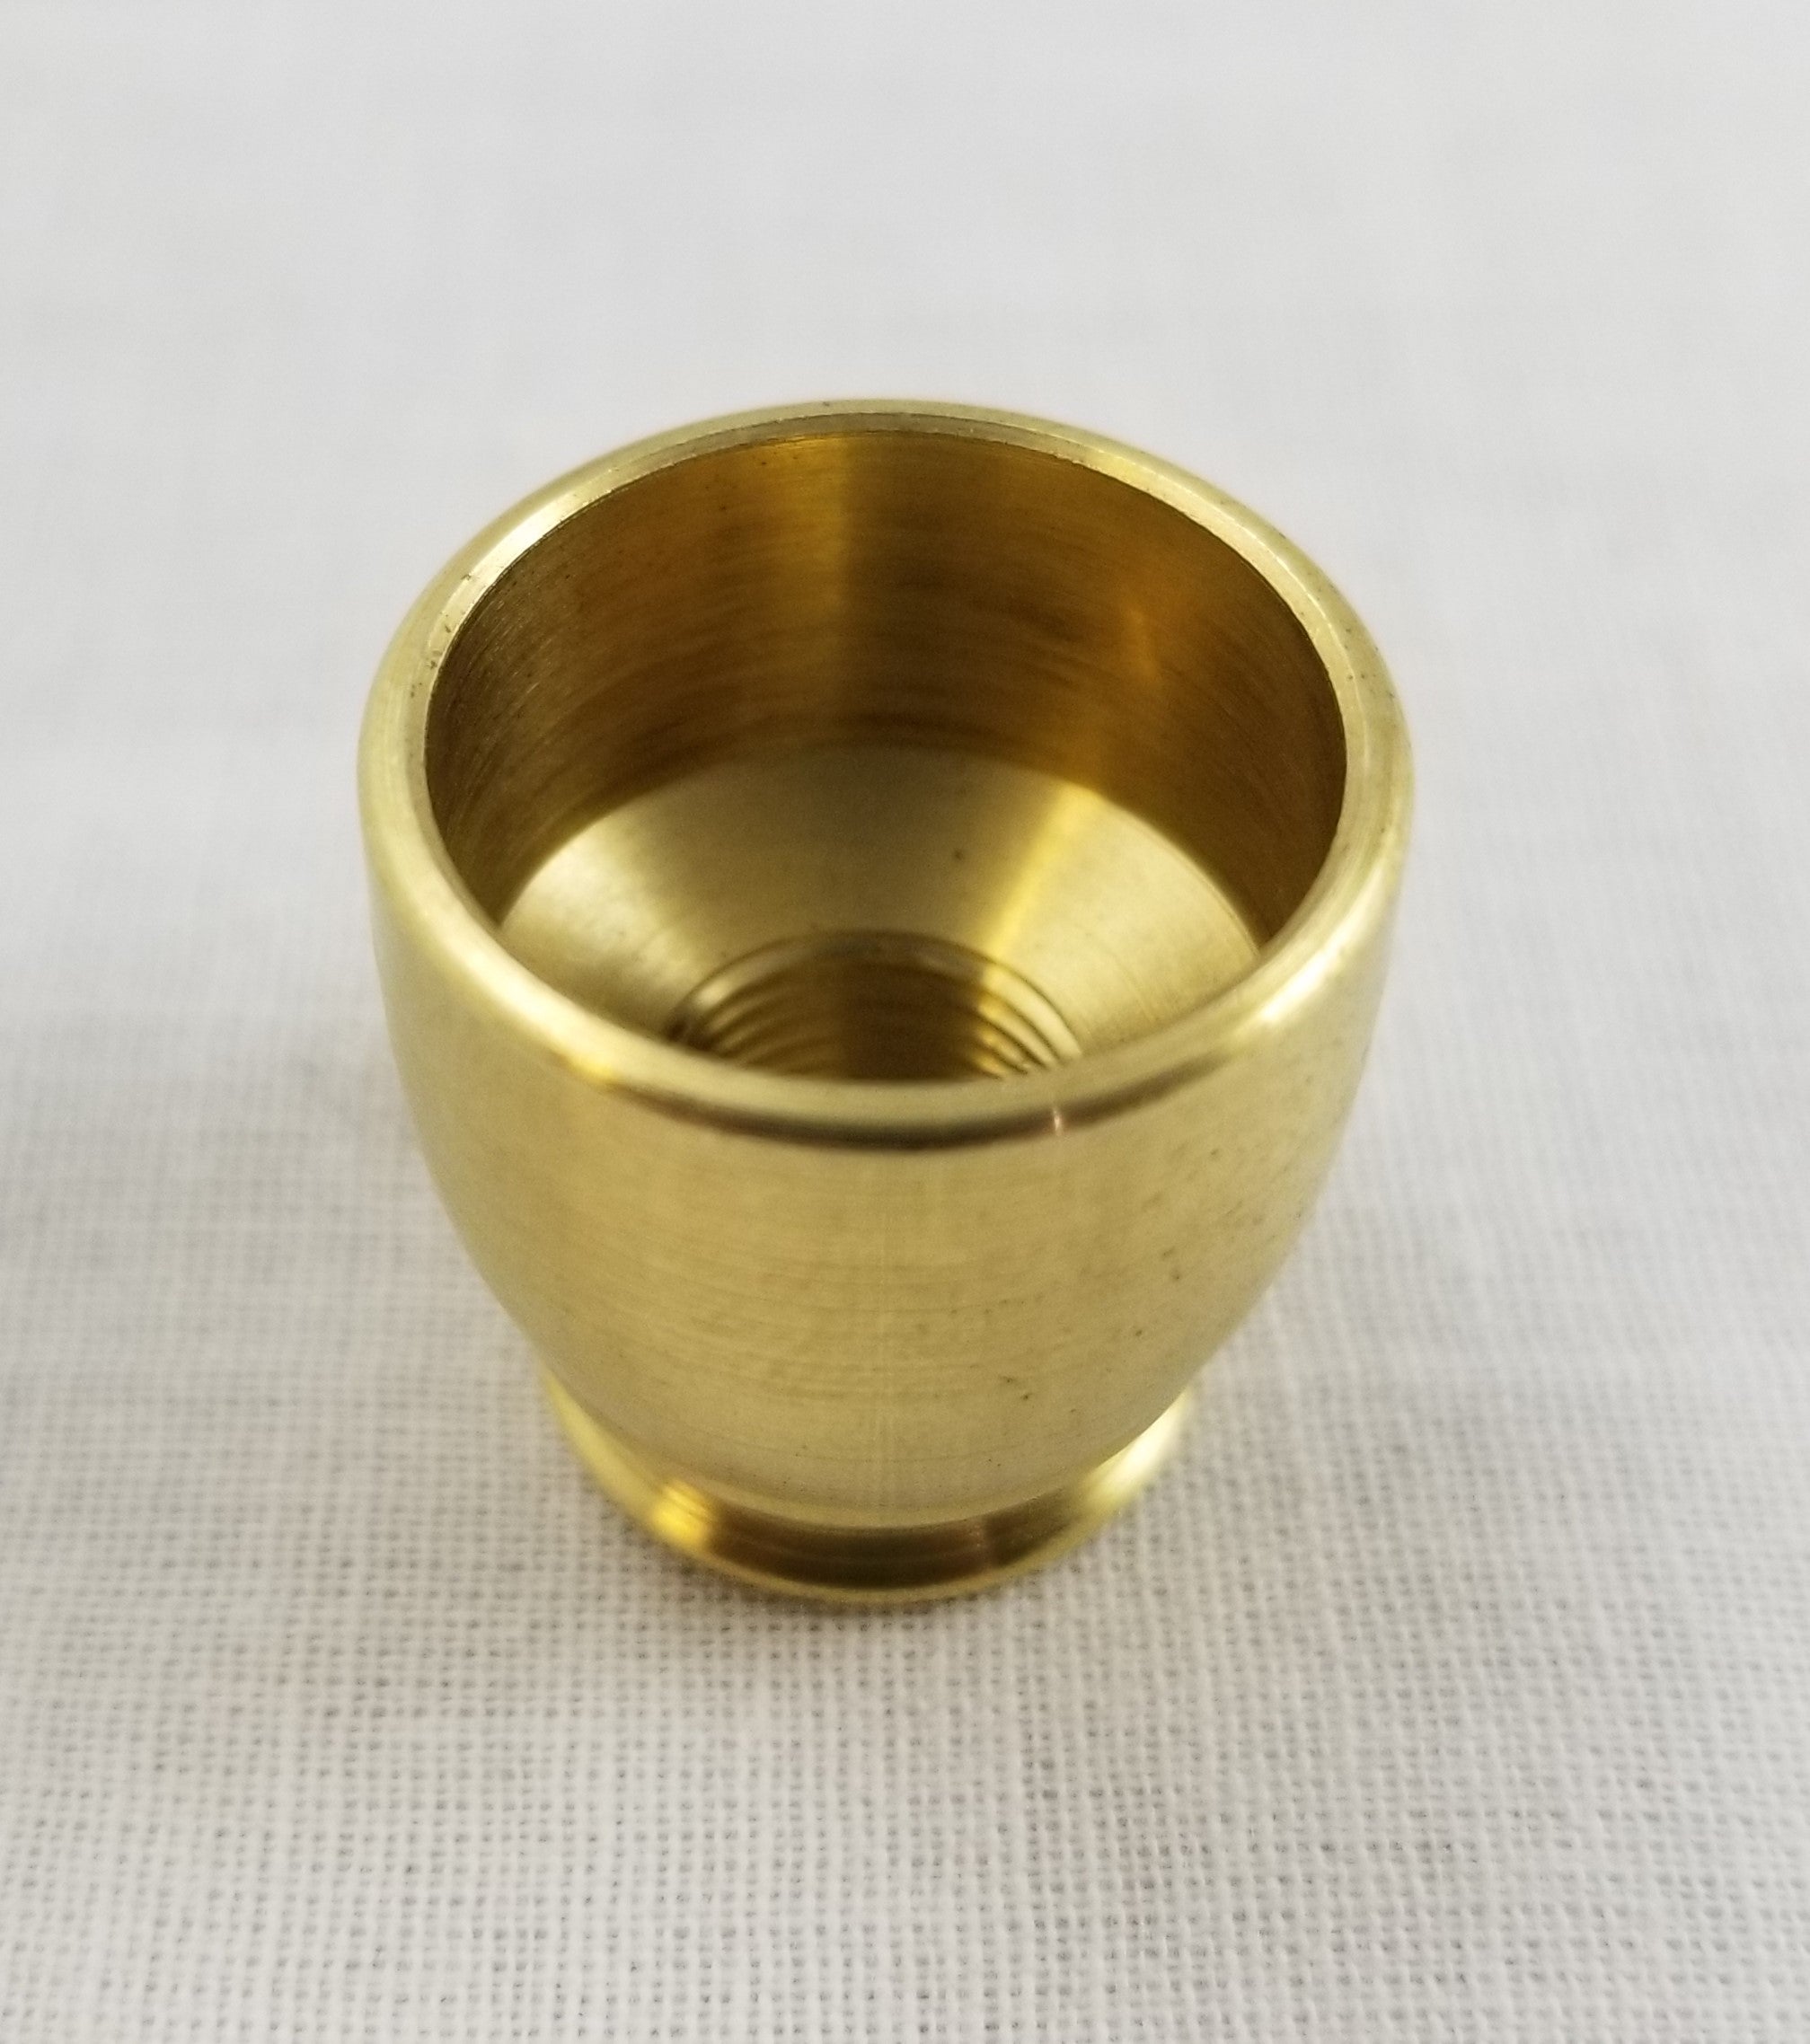 Nozzle - 1/8 IP F x 3/8 IP SLIP - Solid Brass Unfinished